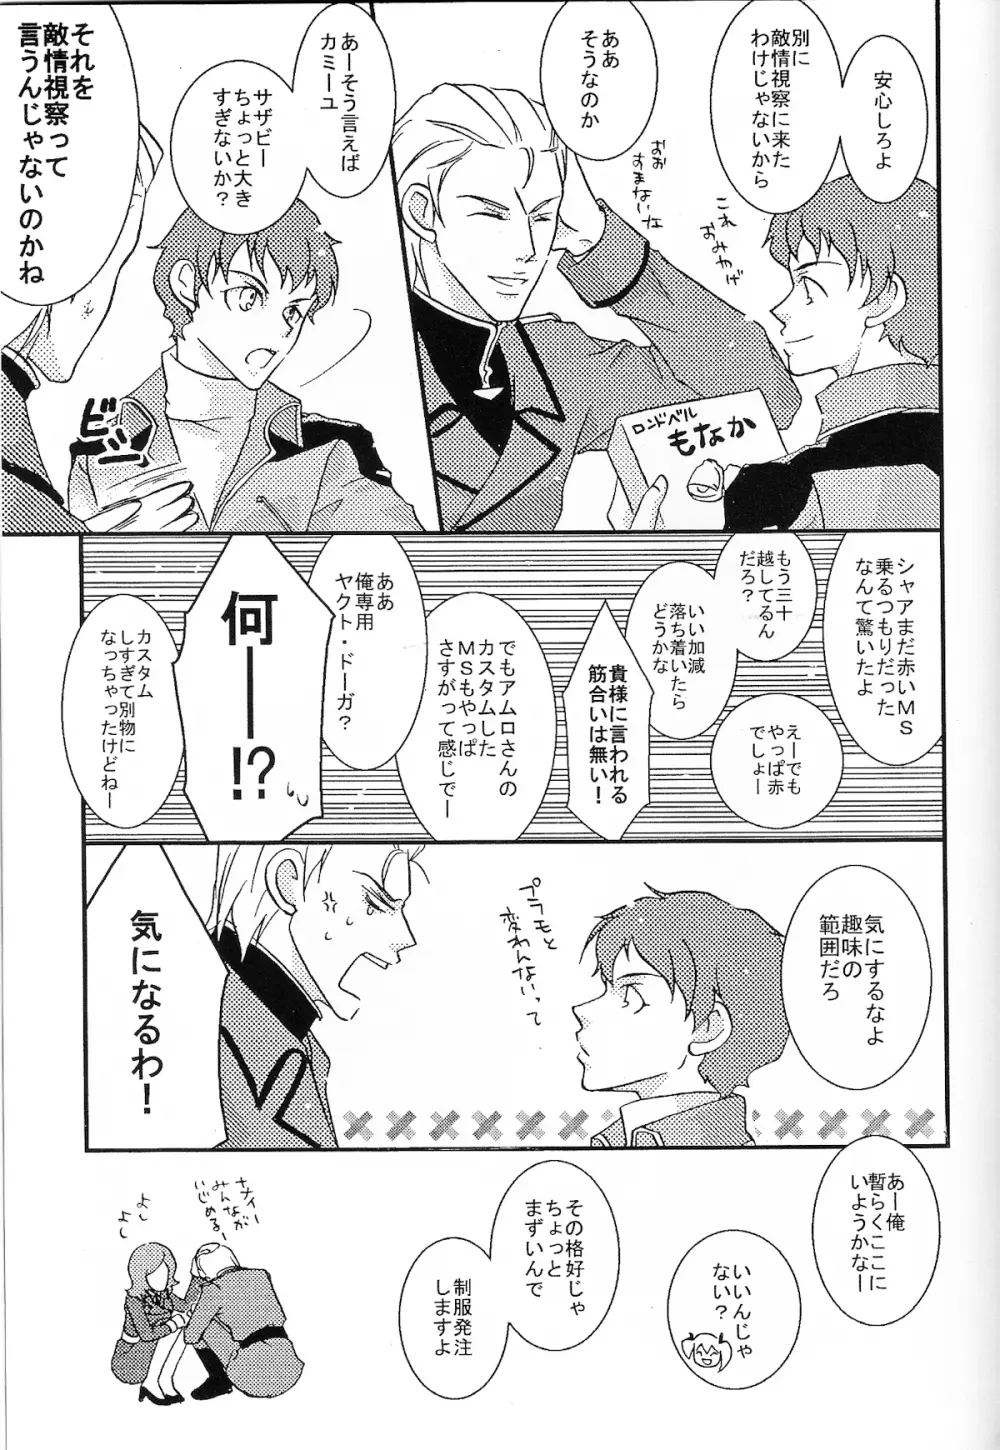 REPLAY 108 再録本 - page93